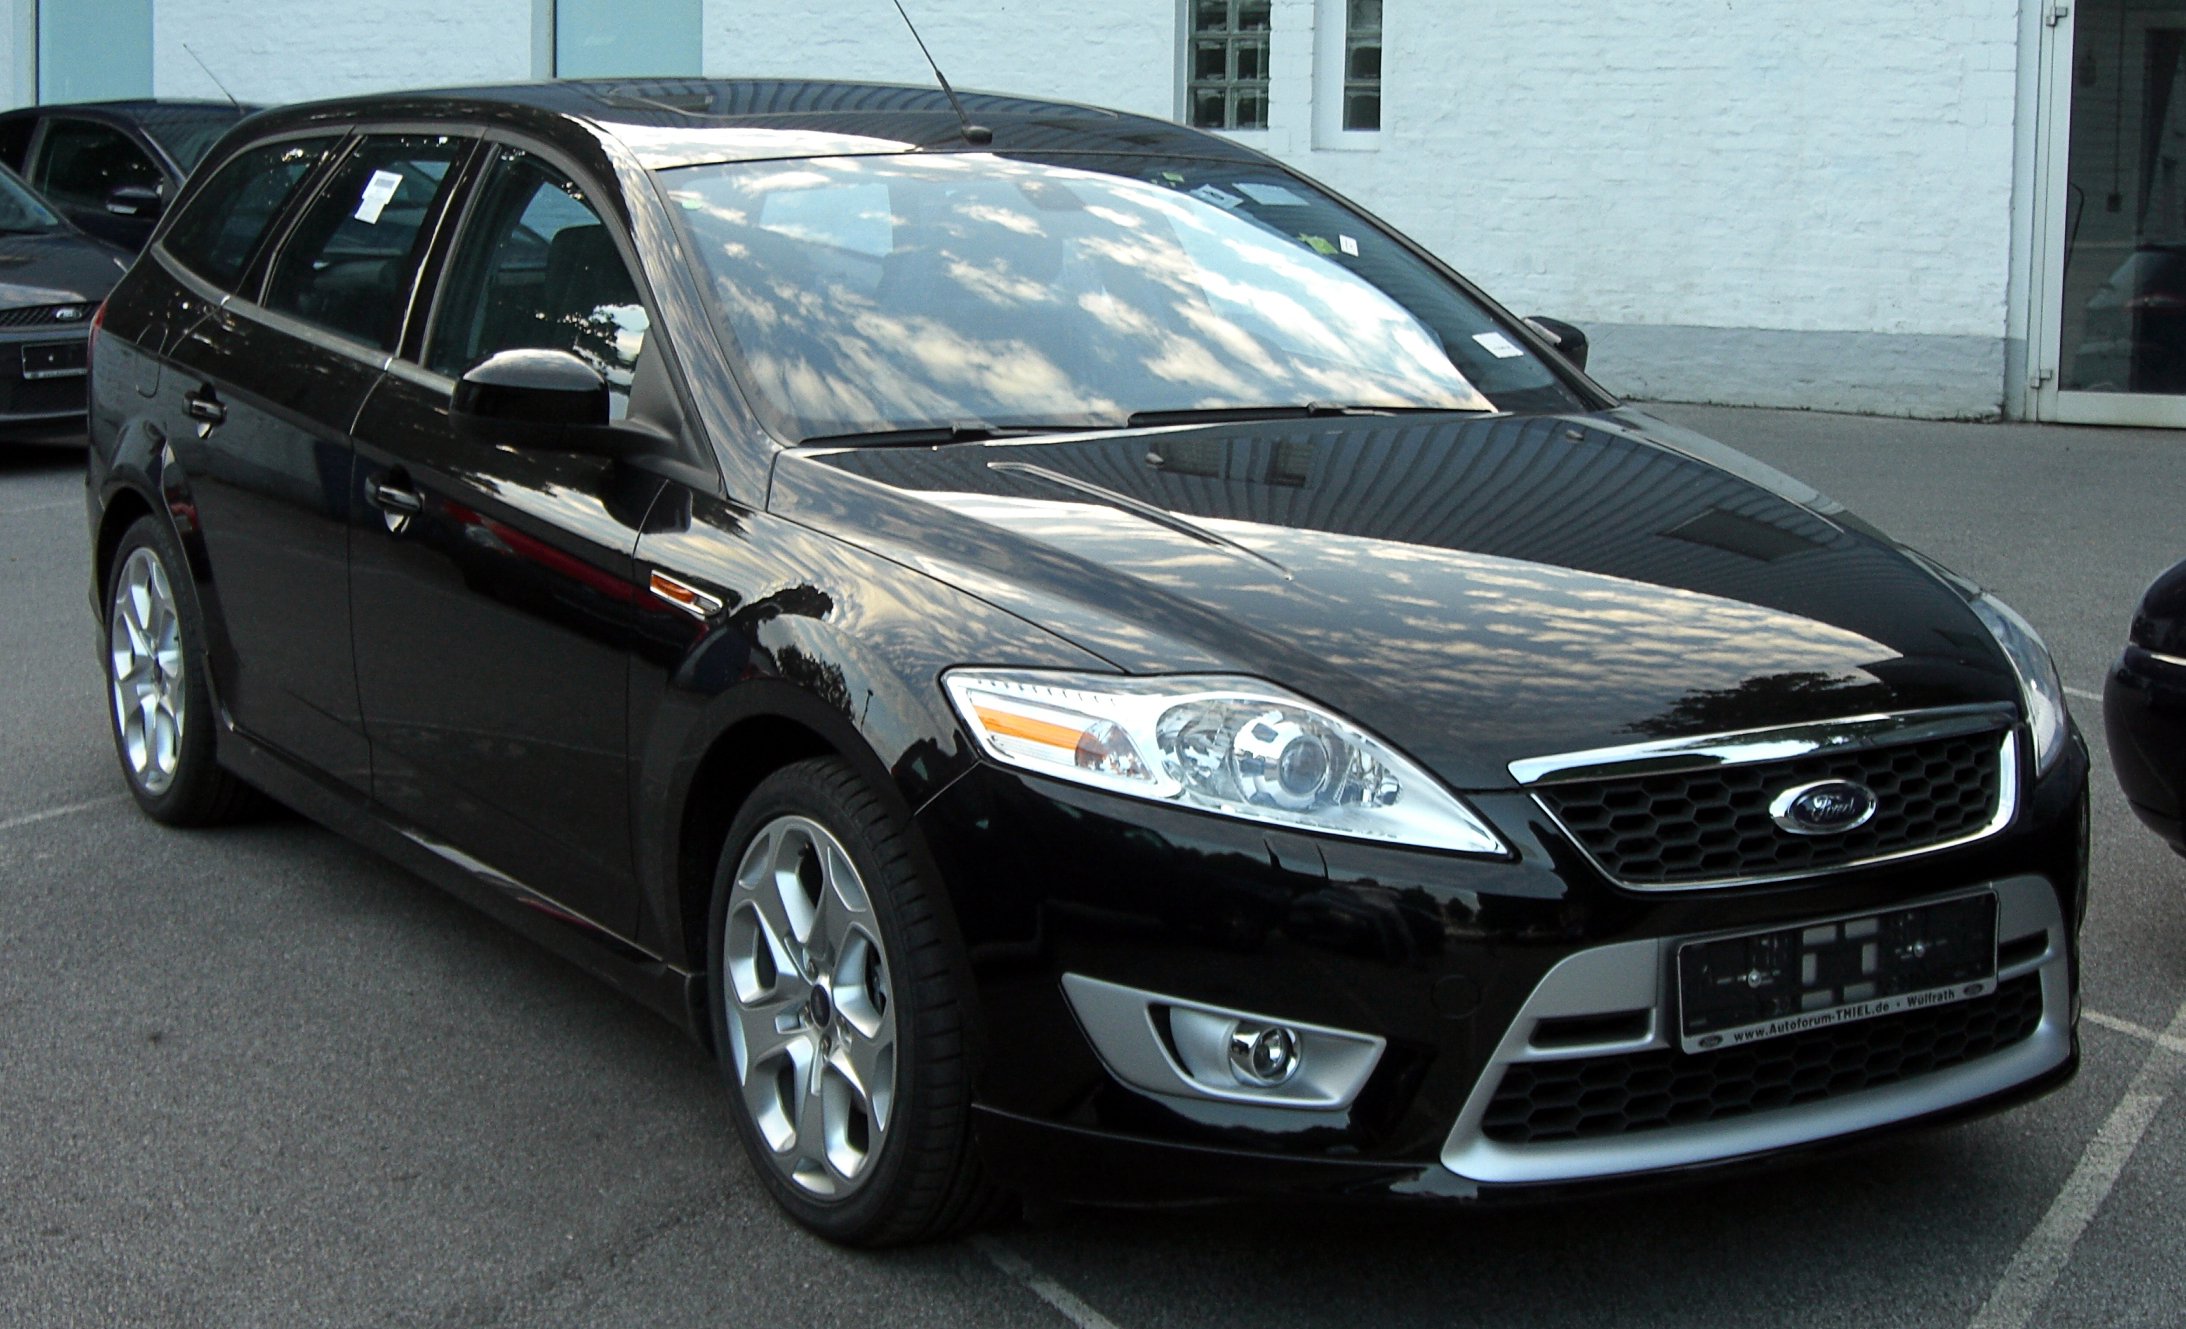 Ford_Mondeo_Turnier_2.5T_front.jpg